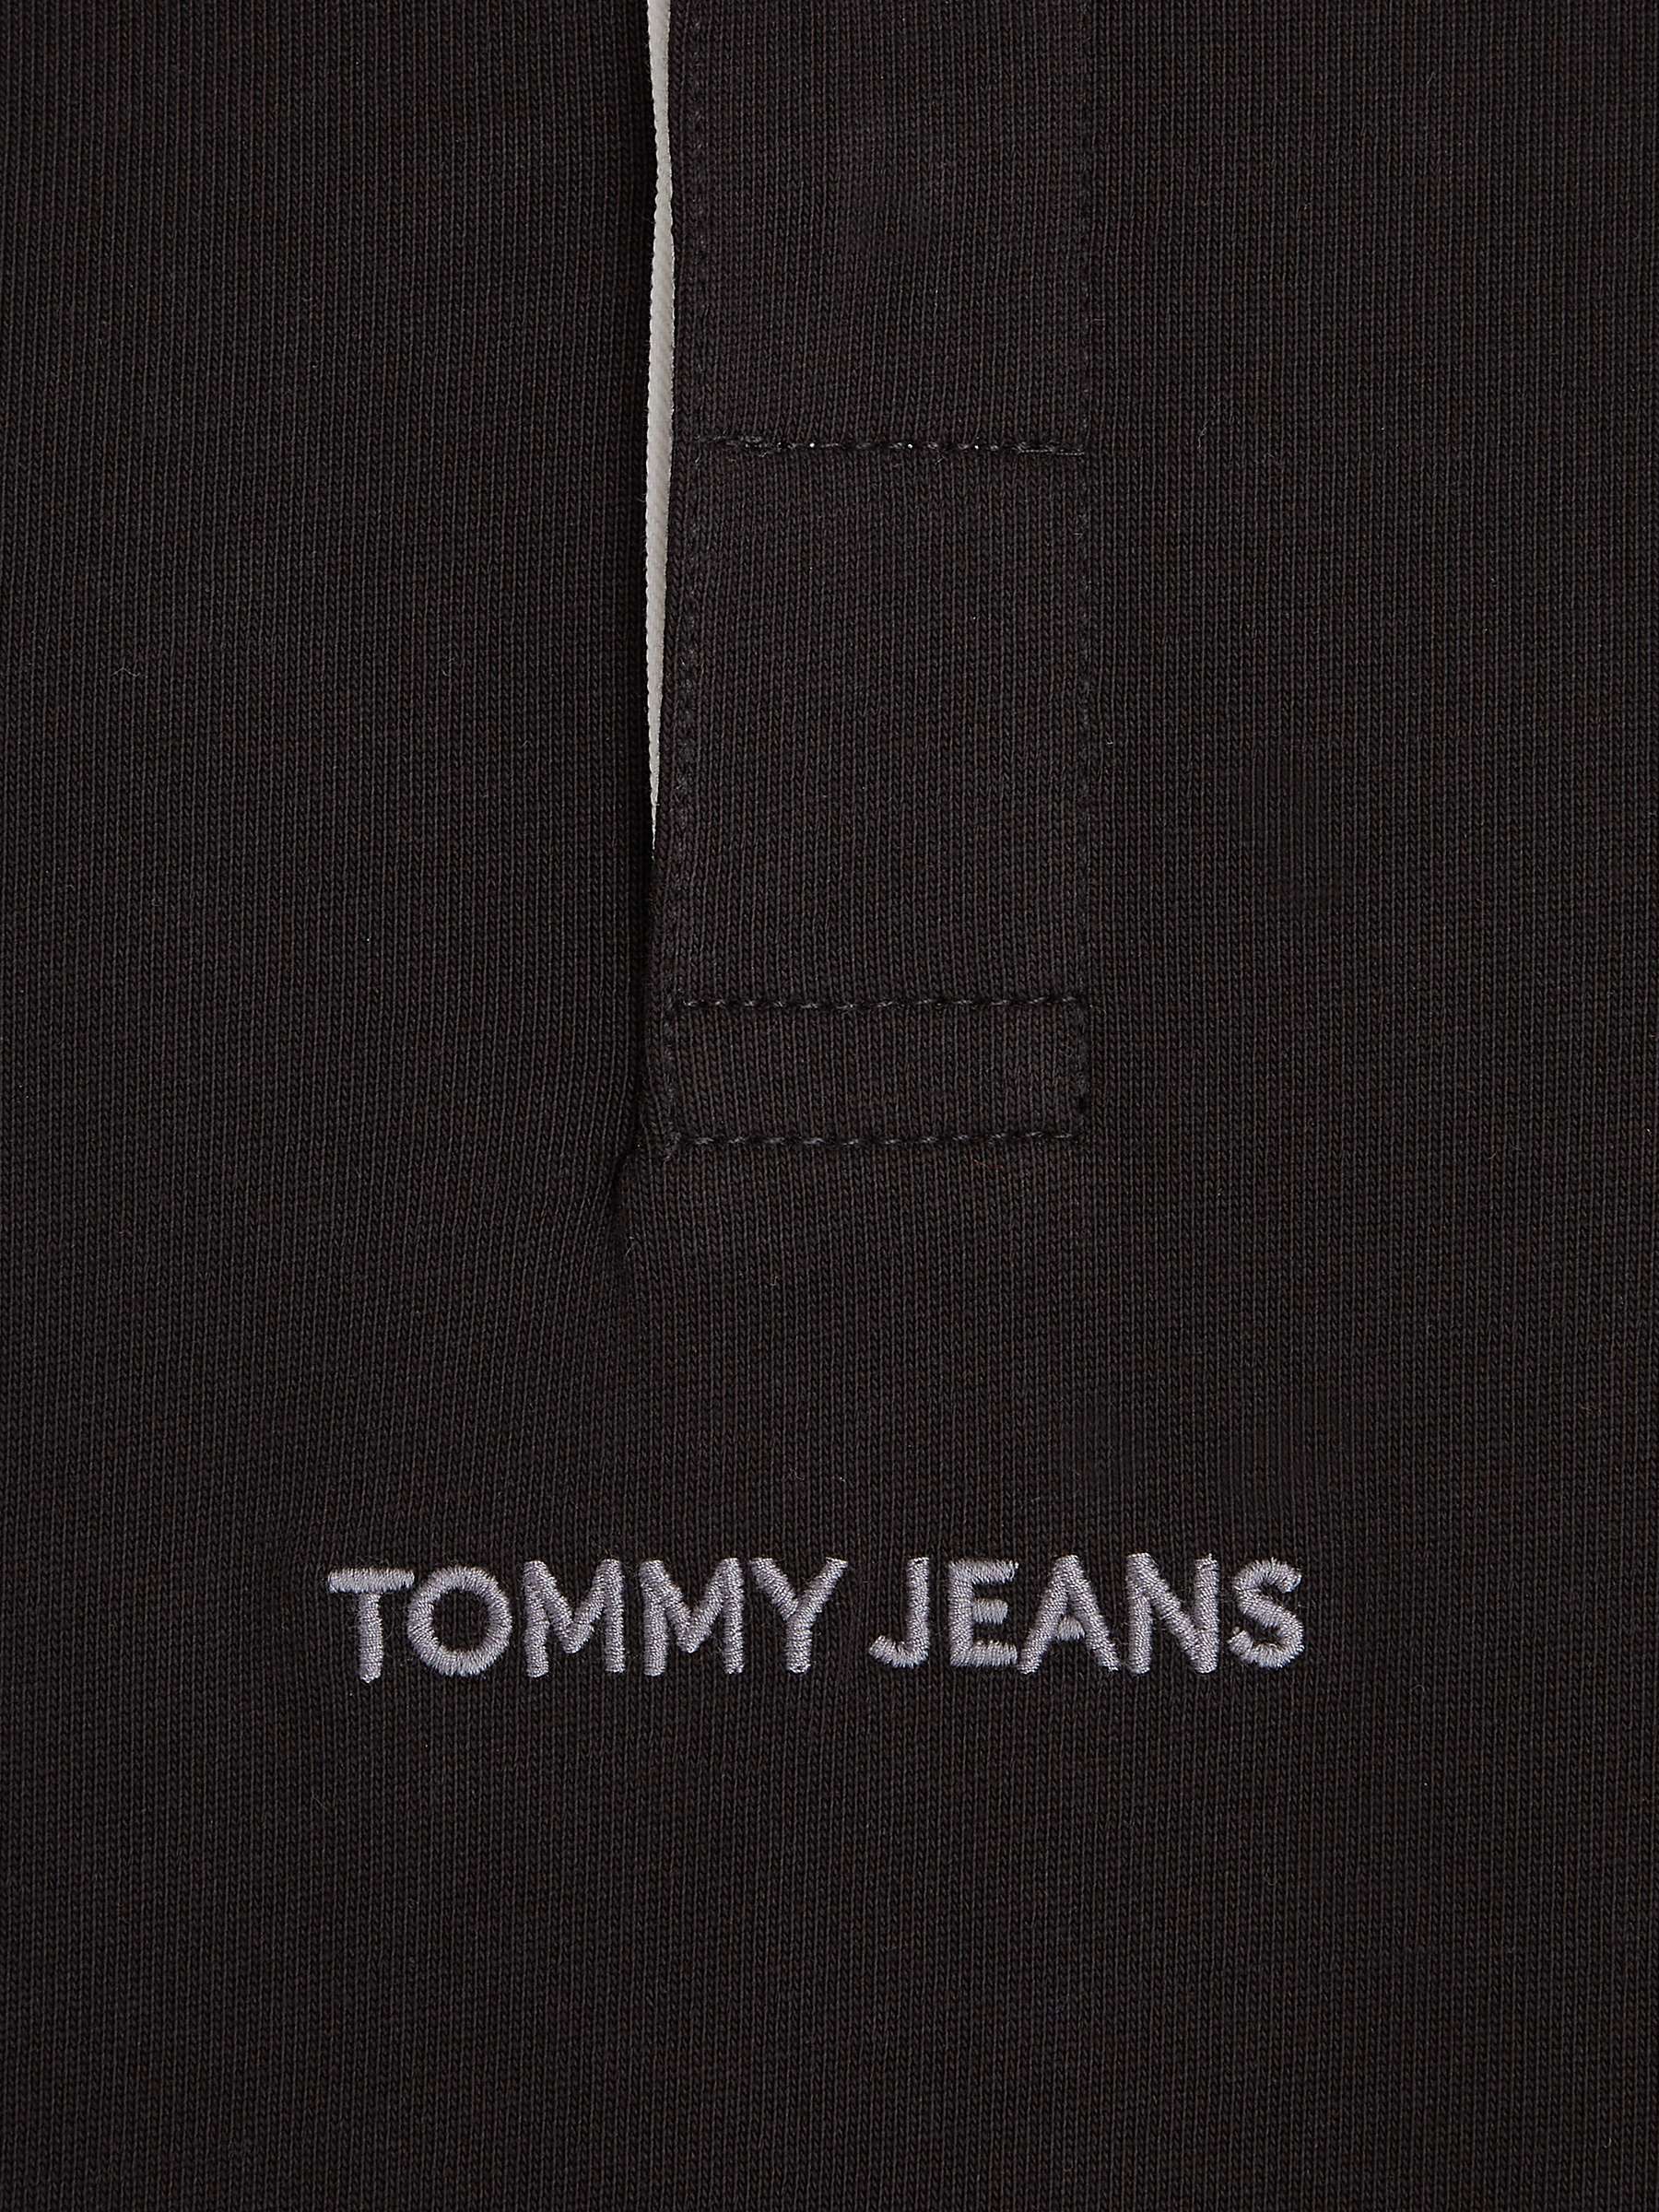 Buy Tommy Jeans Classic Long Sleeve Rugby Top, Black Online at johnlewis.com